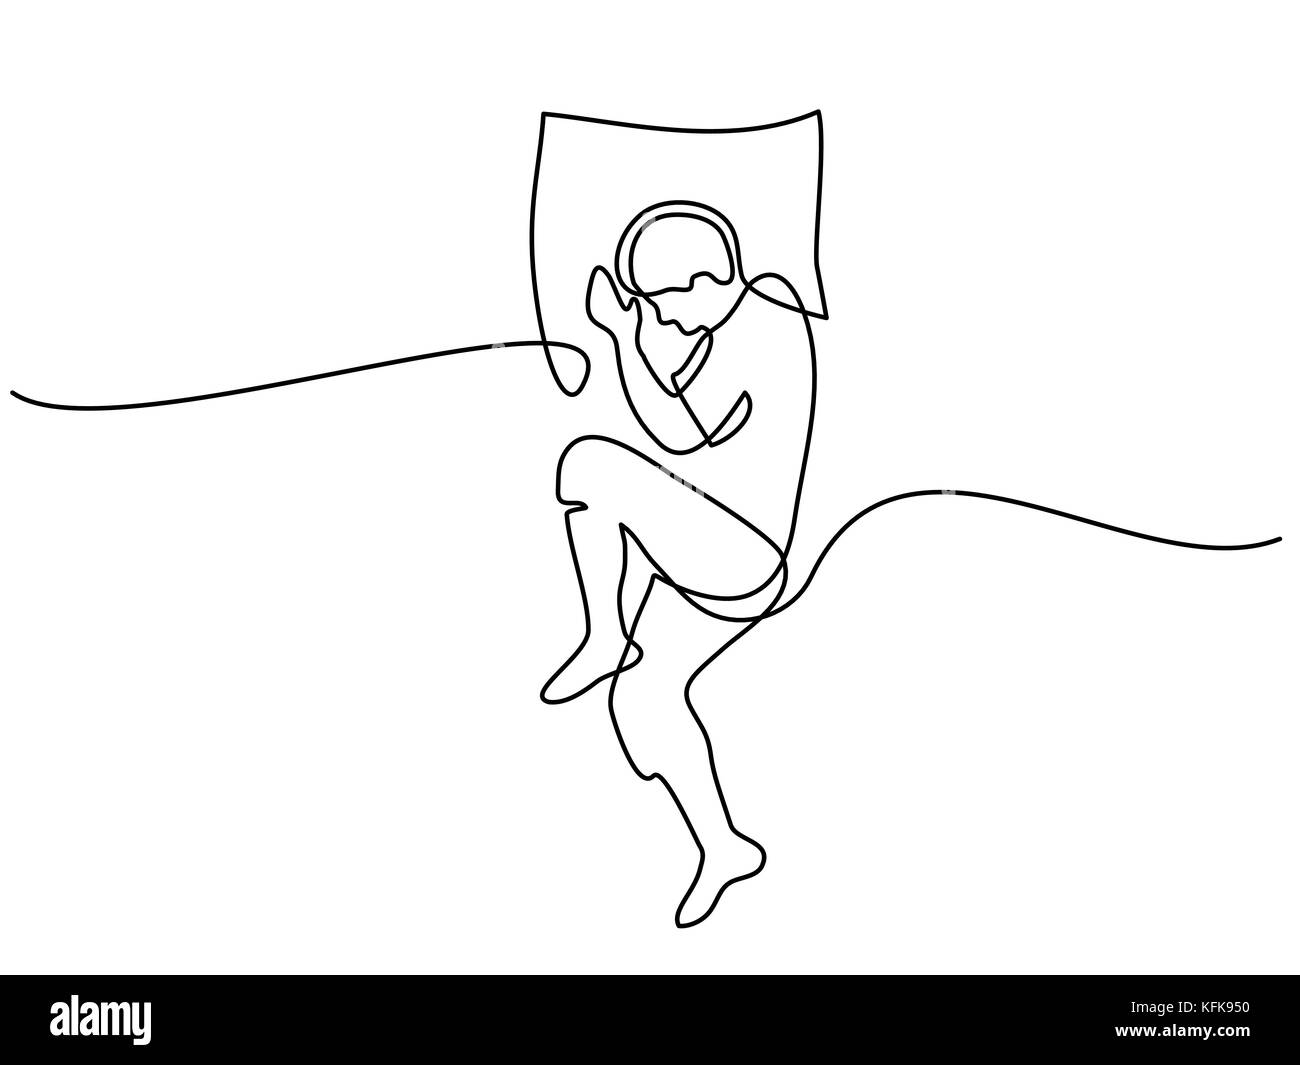 Discover more than 174 sketch of sleeping